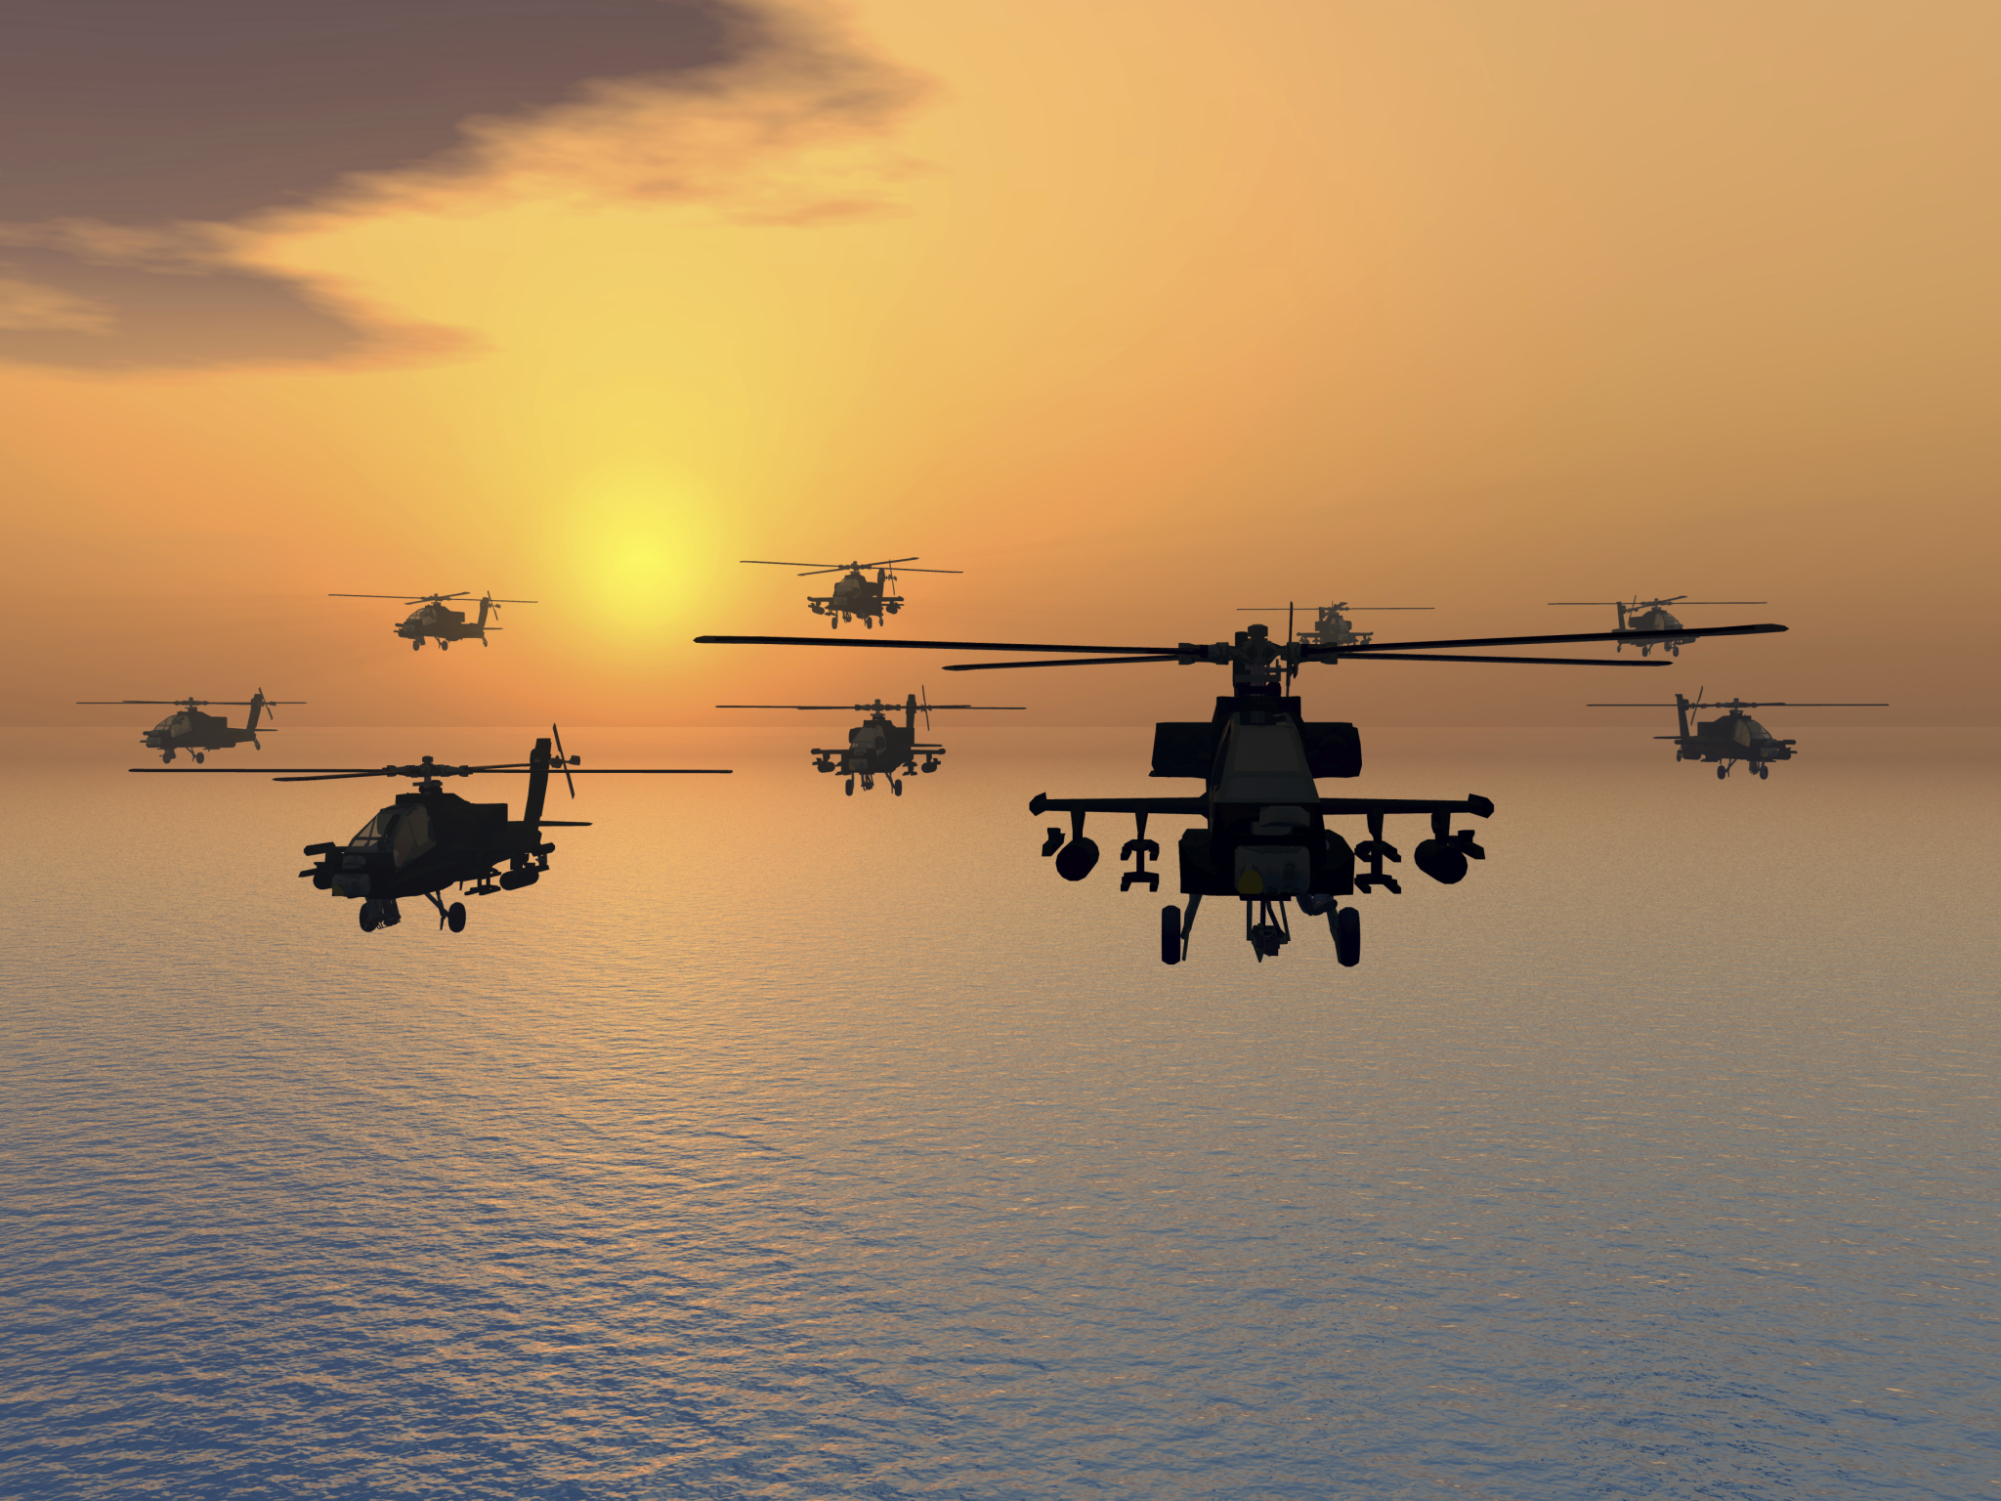 Modern combat helicopters flying over water